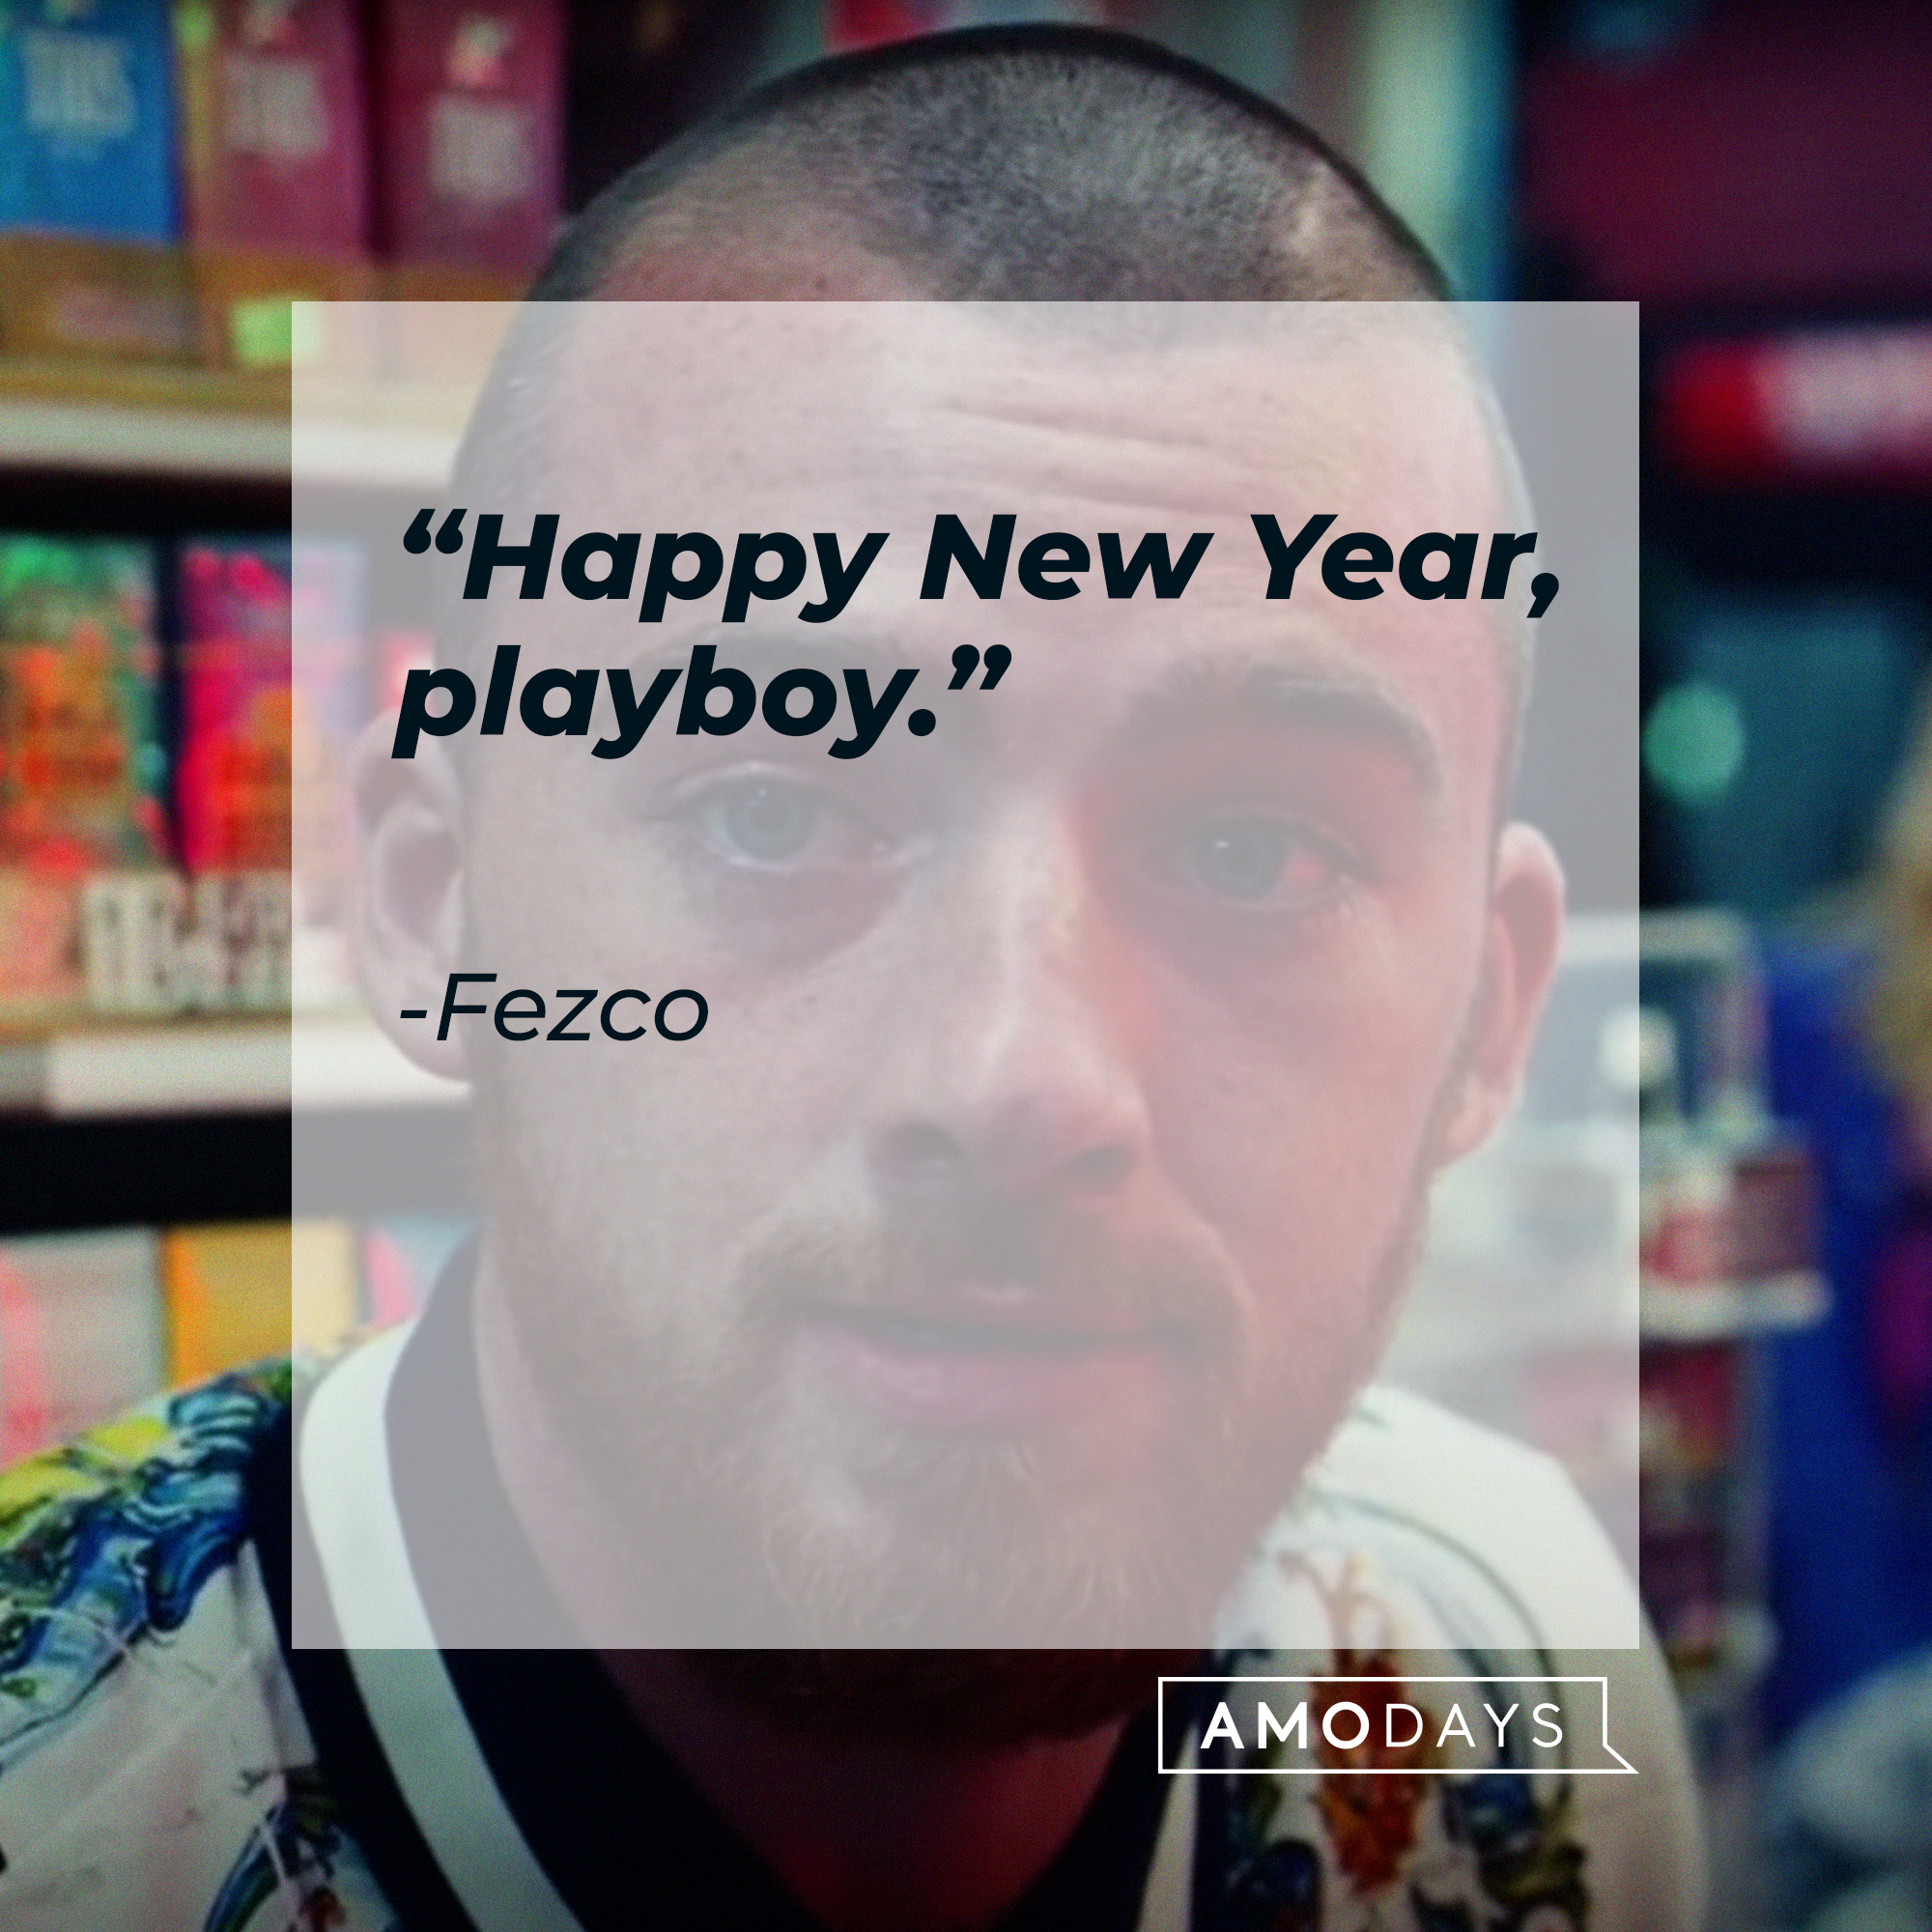 Fezco, with his quote: "Happy New Year, playboy." | Source: youtube.com/EuphoriaHBO